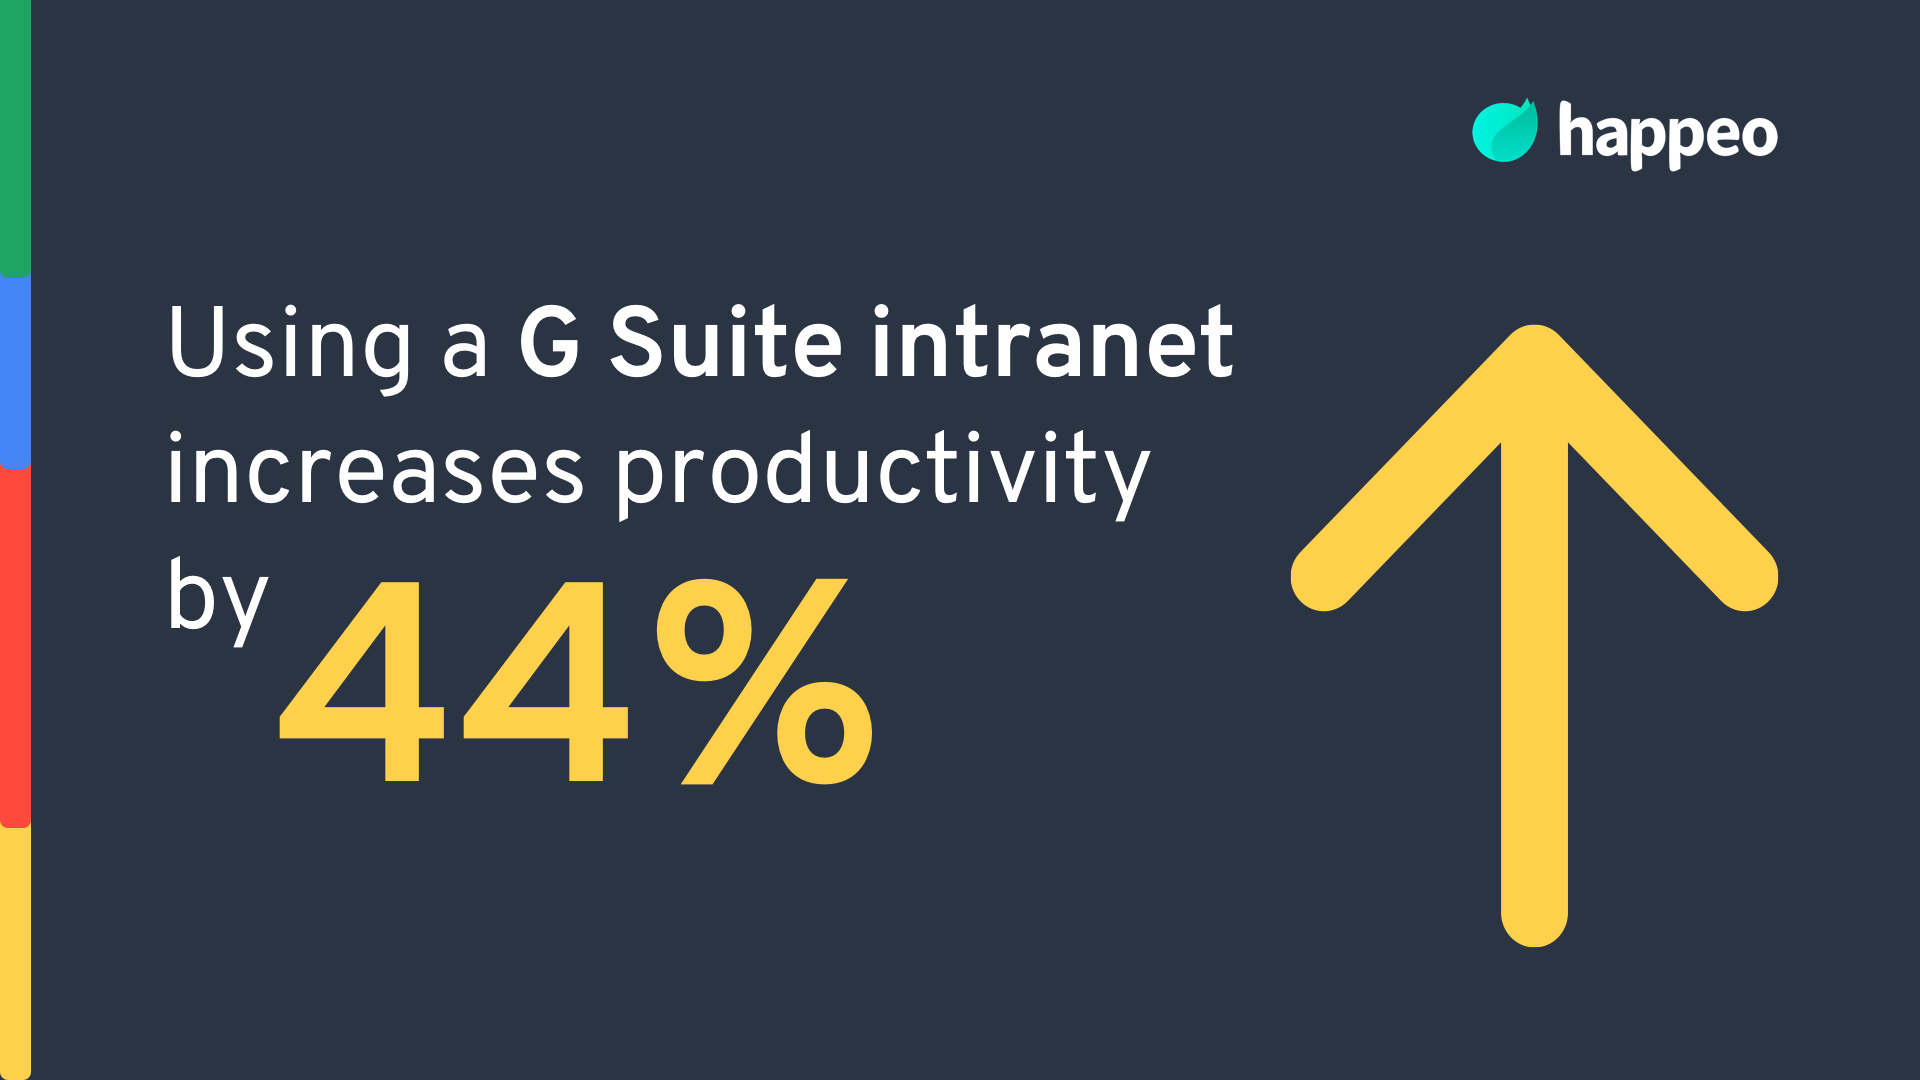 Using a G Suite intranet increases productivity by 44%